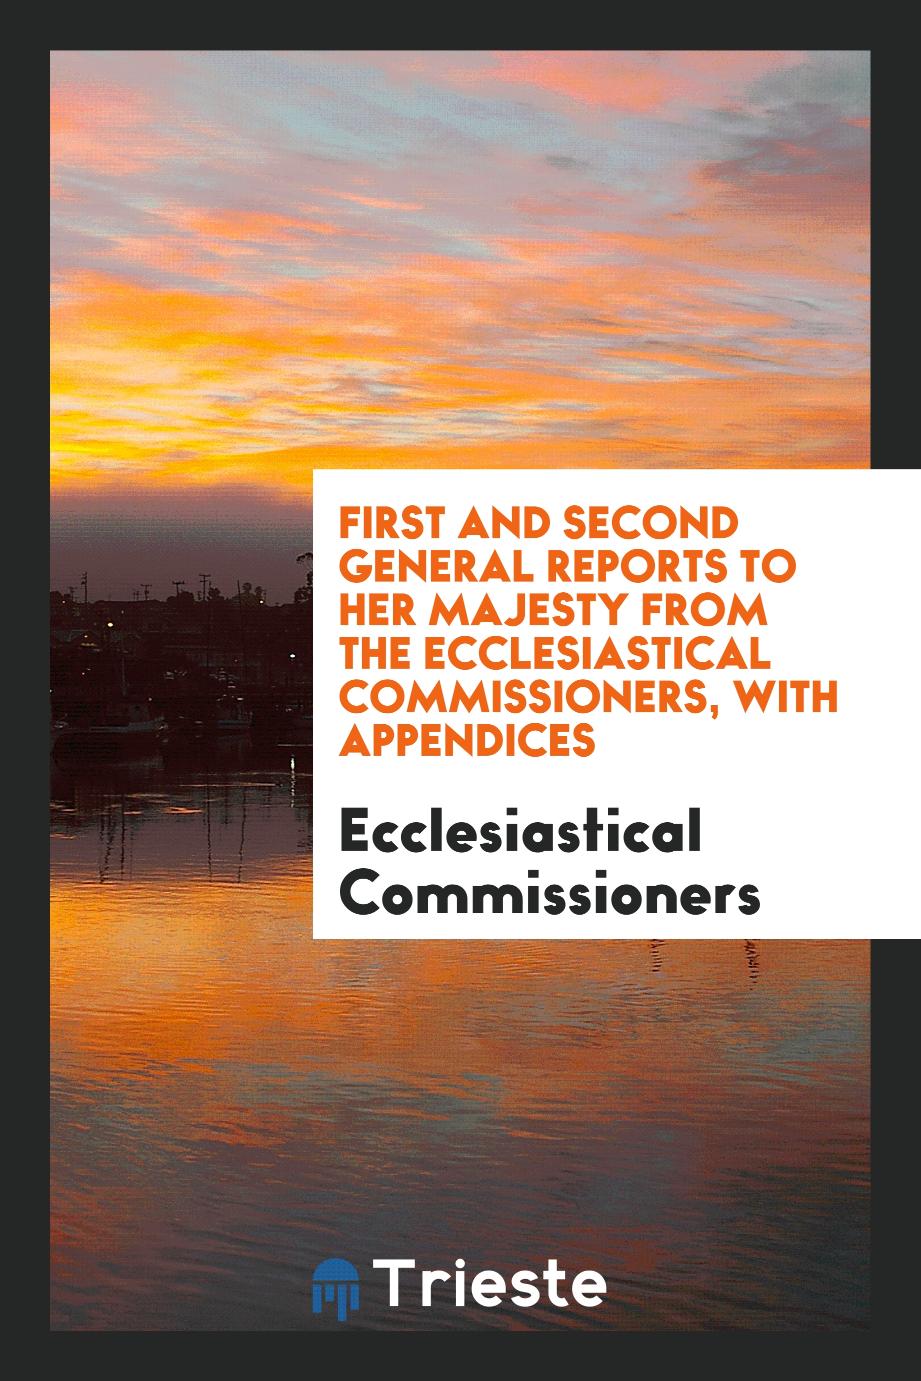 First and Second General Reports to Her Majesty from the Ecclesiastical Commissioners, with Appendices